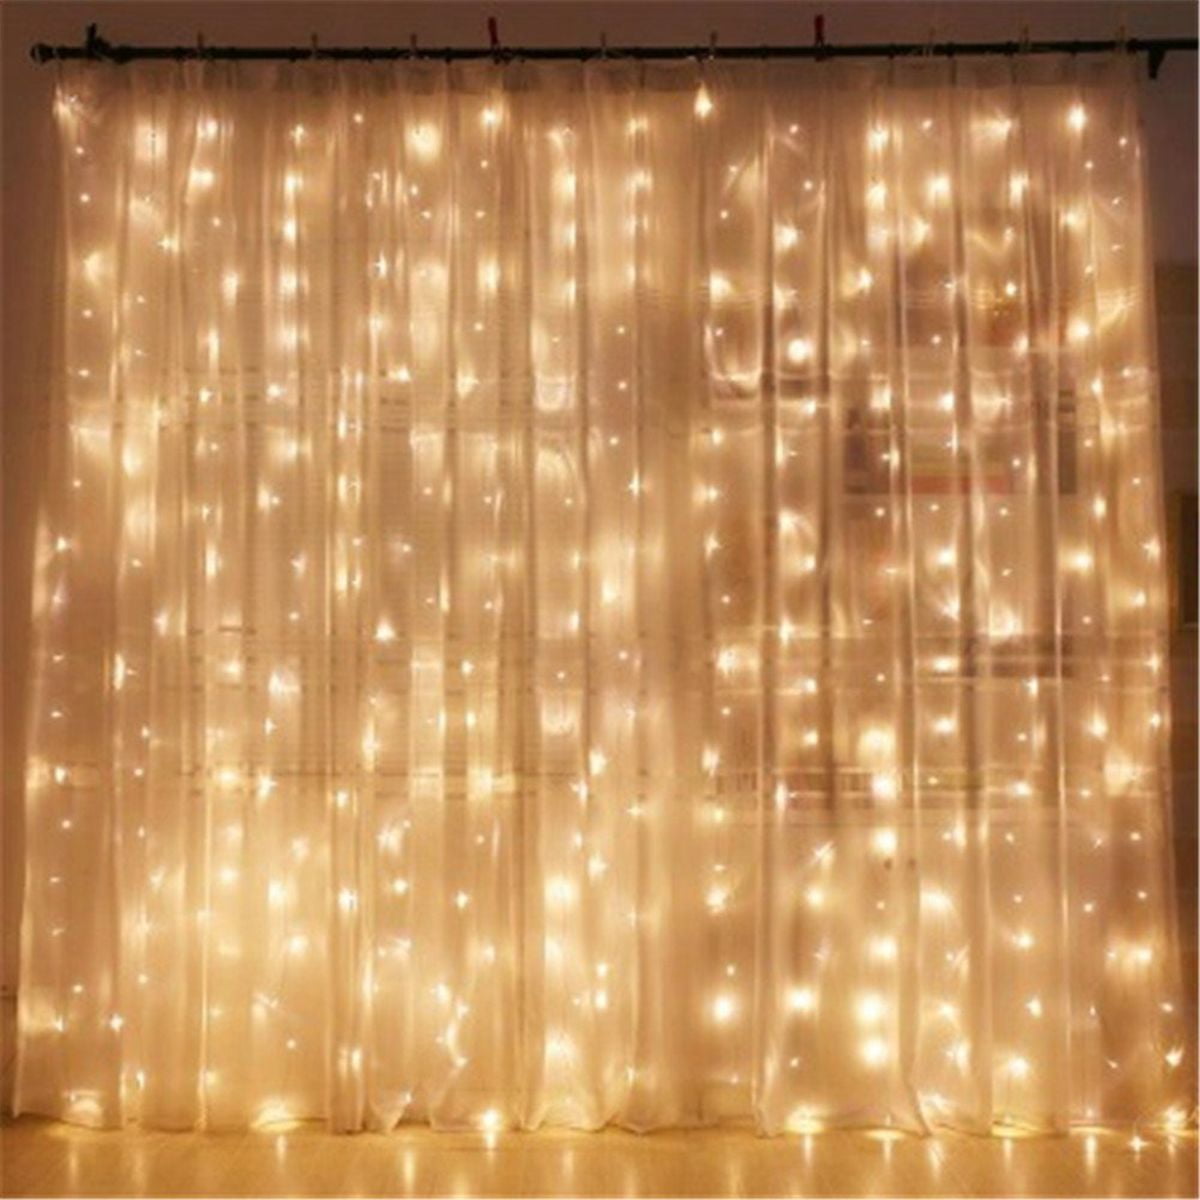 Led Curtain Lights 3m X Window, Hanging Curtain Lights Battery Operated